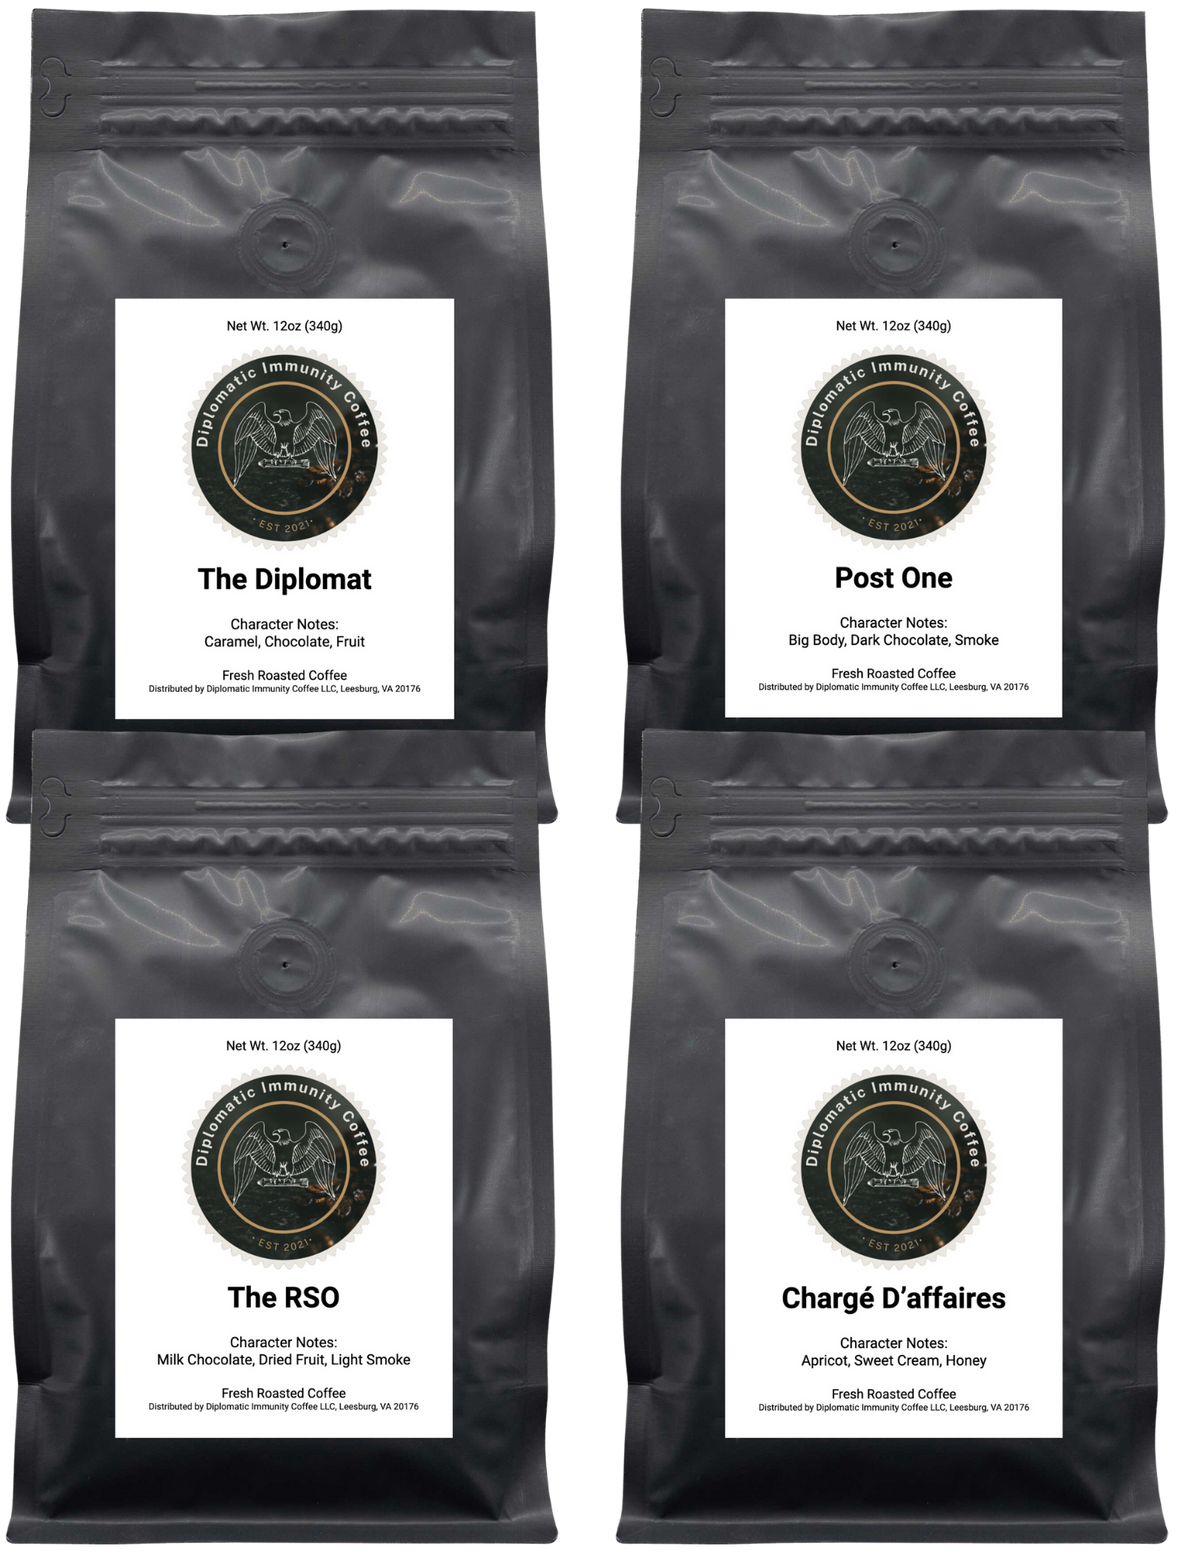 THE EMBASSY - 4 COFFEE SAMPLE PACK (POST ONE, THE DIPLOMAT, THE RSO, CHARGÉ D'AFFAIRES)